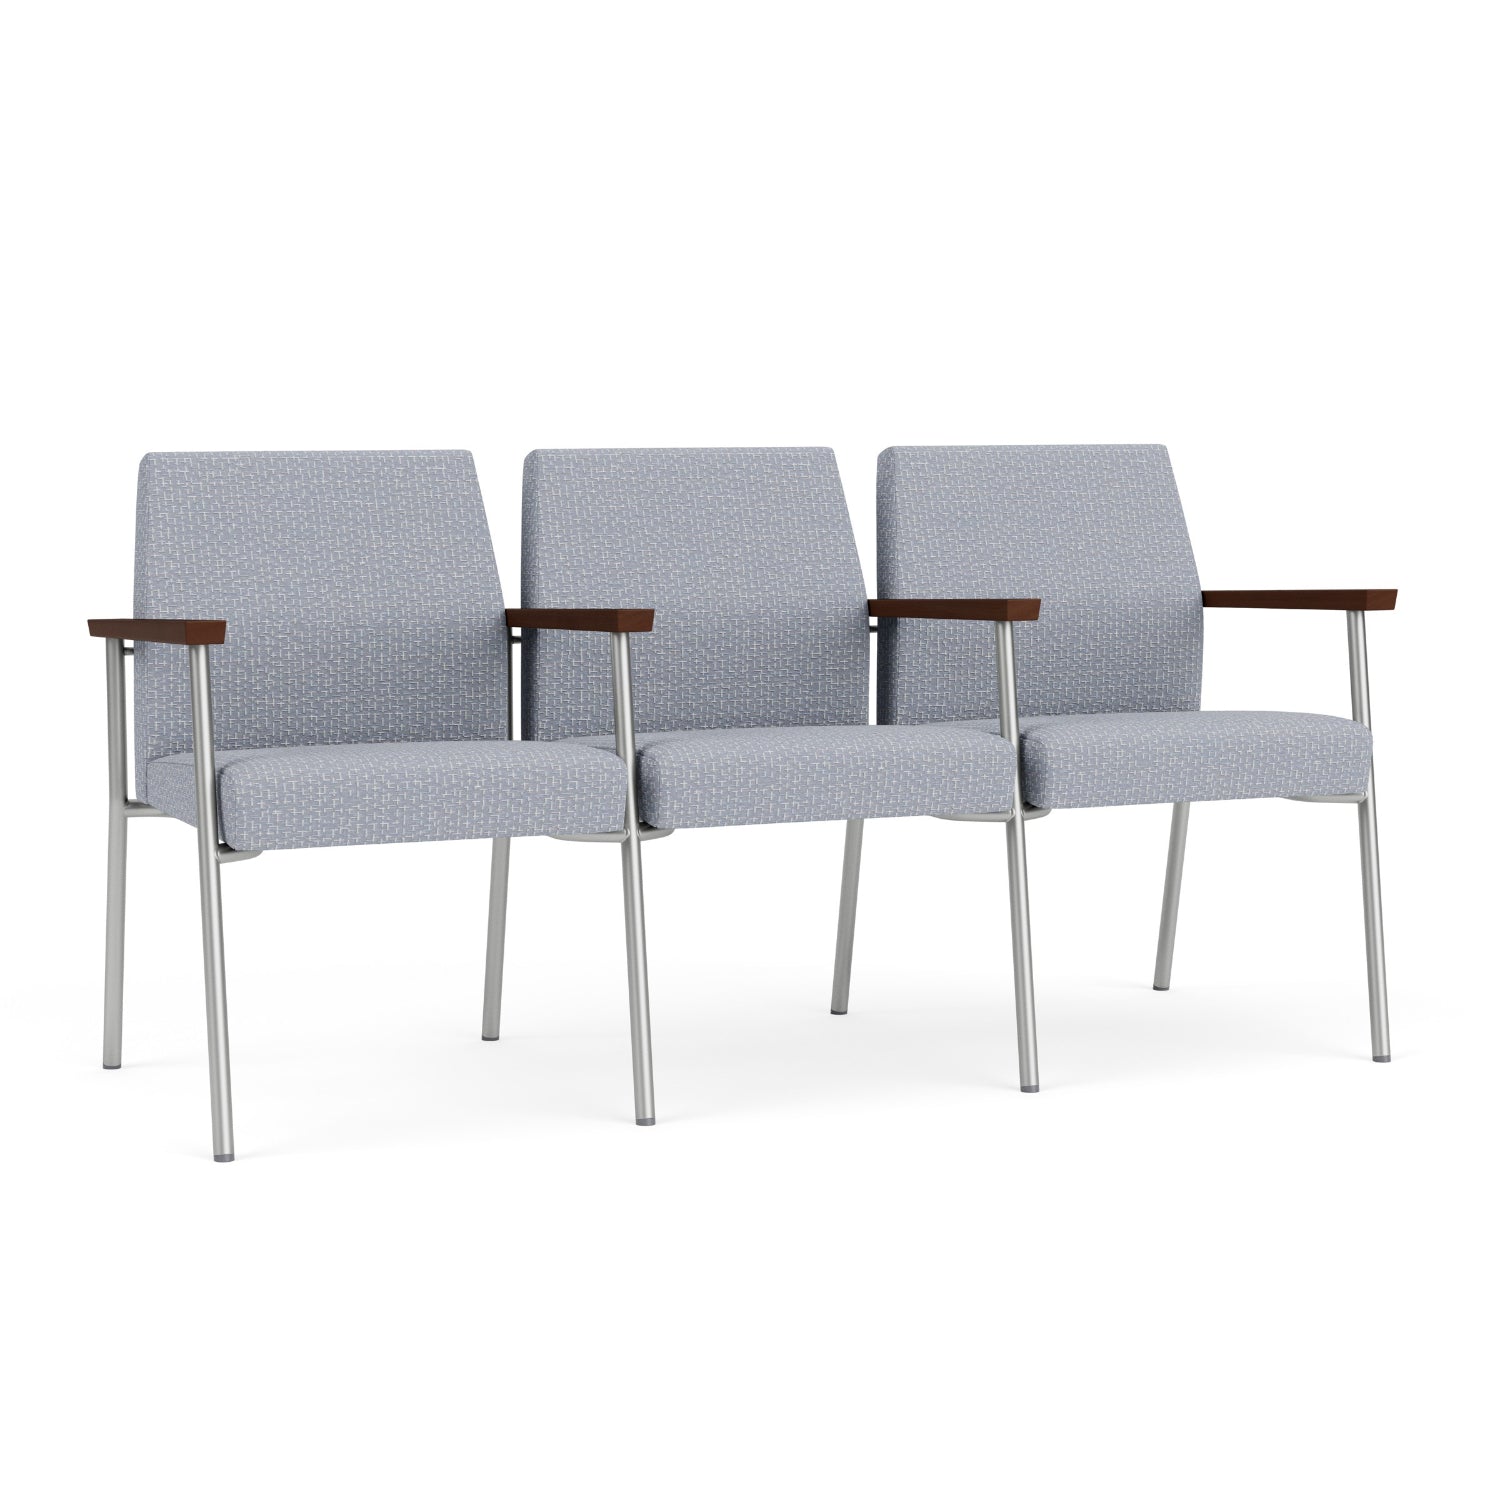 Mystic Guest Collection Reception Seating, 3 Seats with Center Arms, Designer Fabric Upholstery, FREE SHIPPING